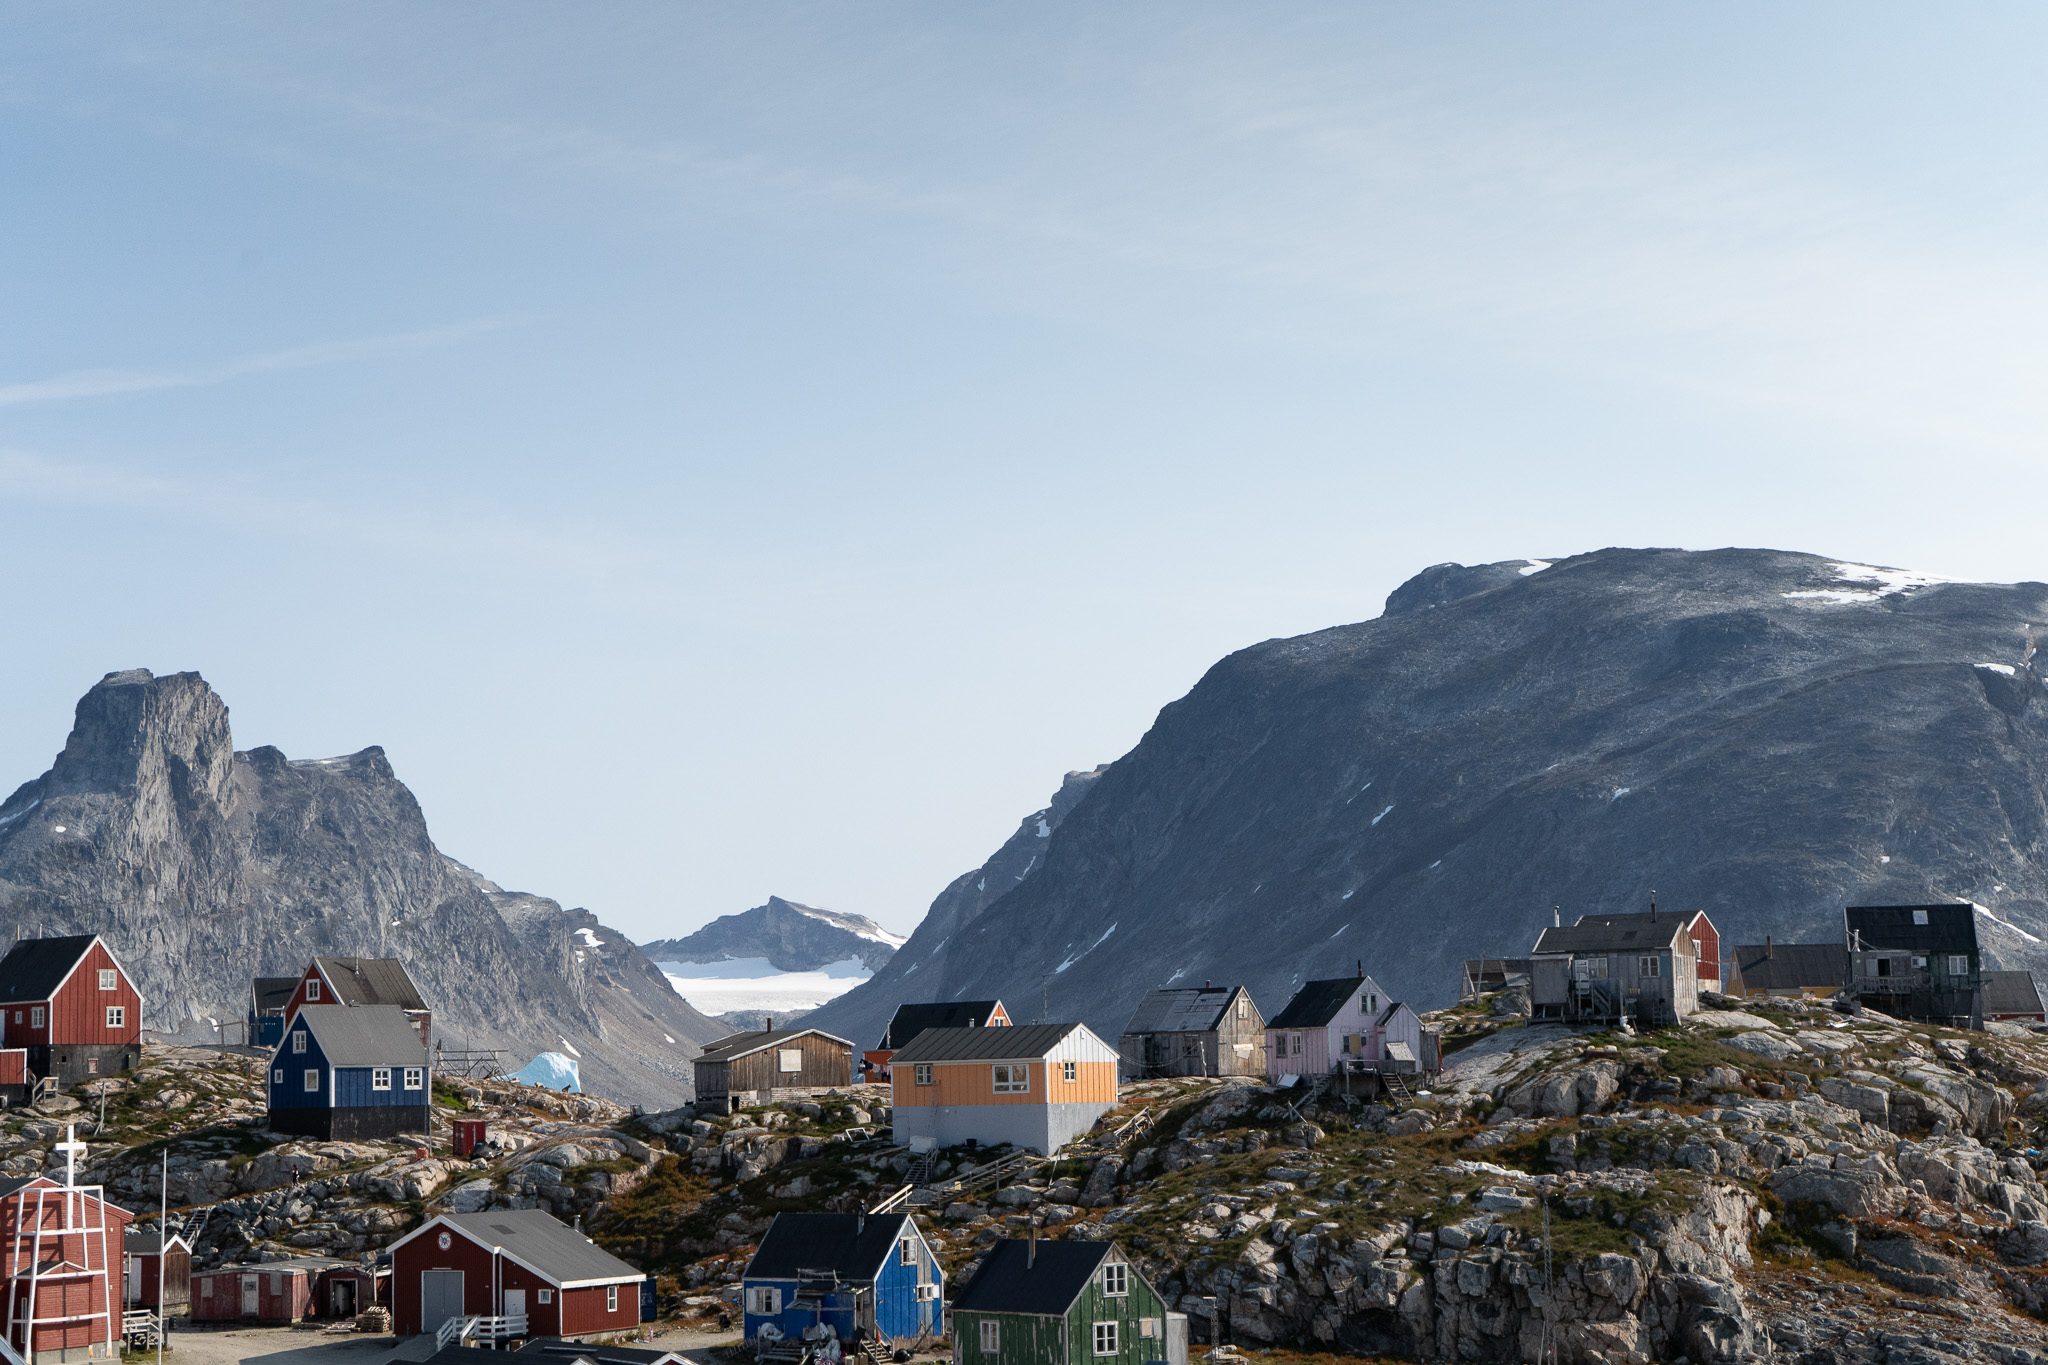 View of the small houses contrasting the majestic mountains. Photo by Visit East Greenland